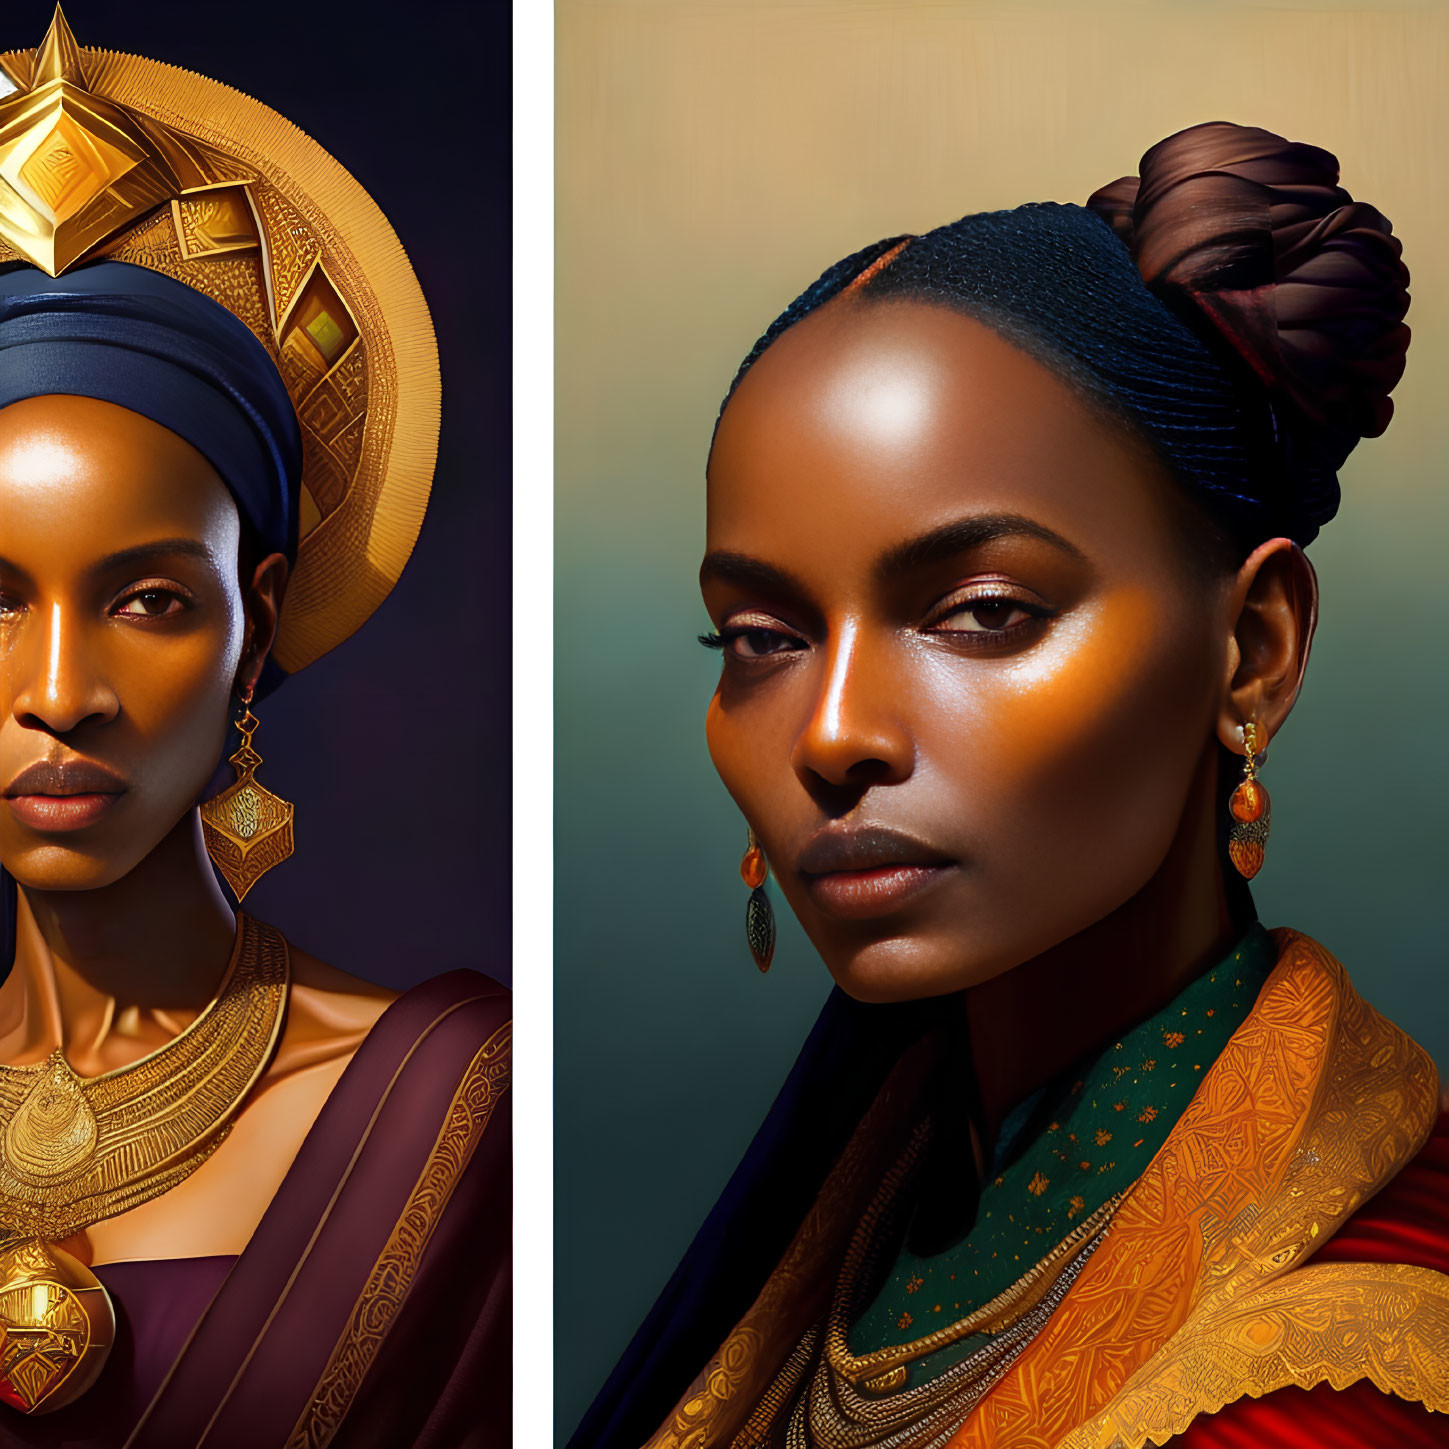 Dual portraits of woman in traditional headwear with golden accessories on dark backdrop, one warm-toned,